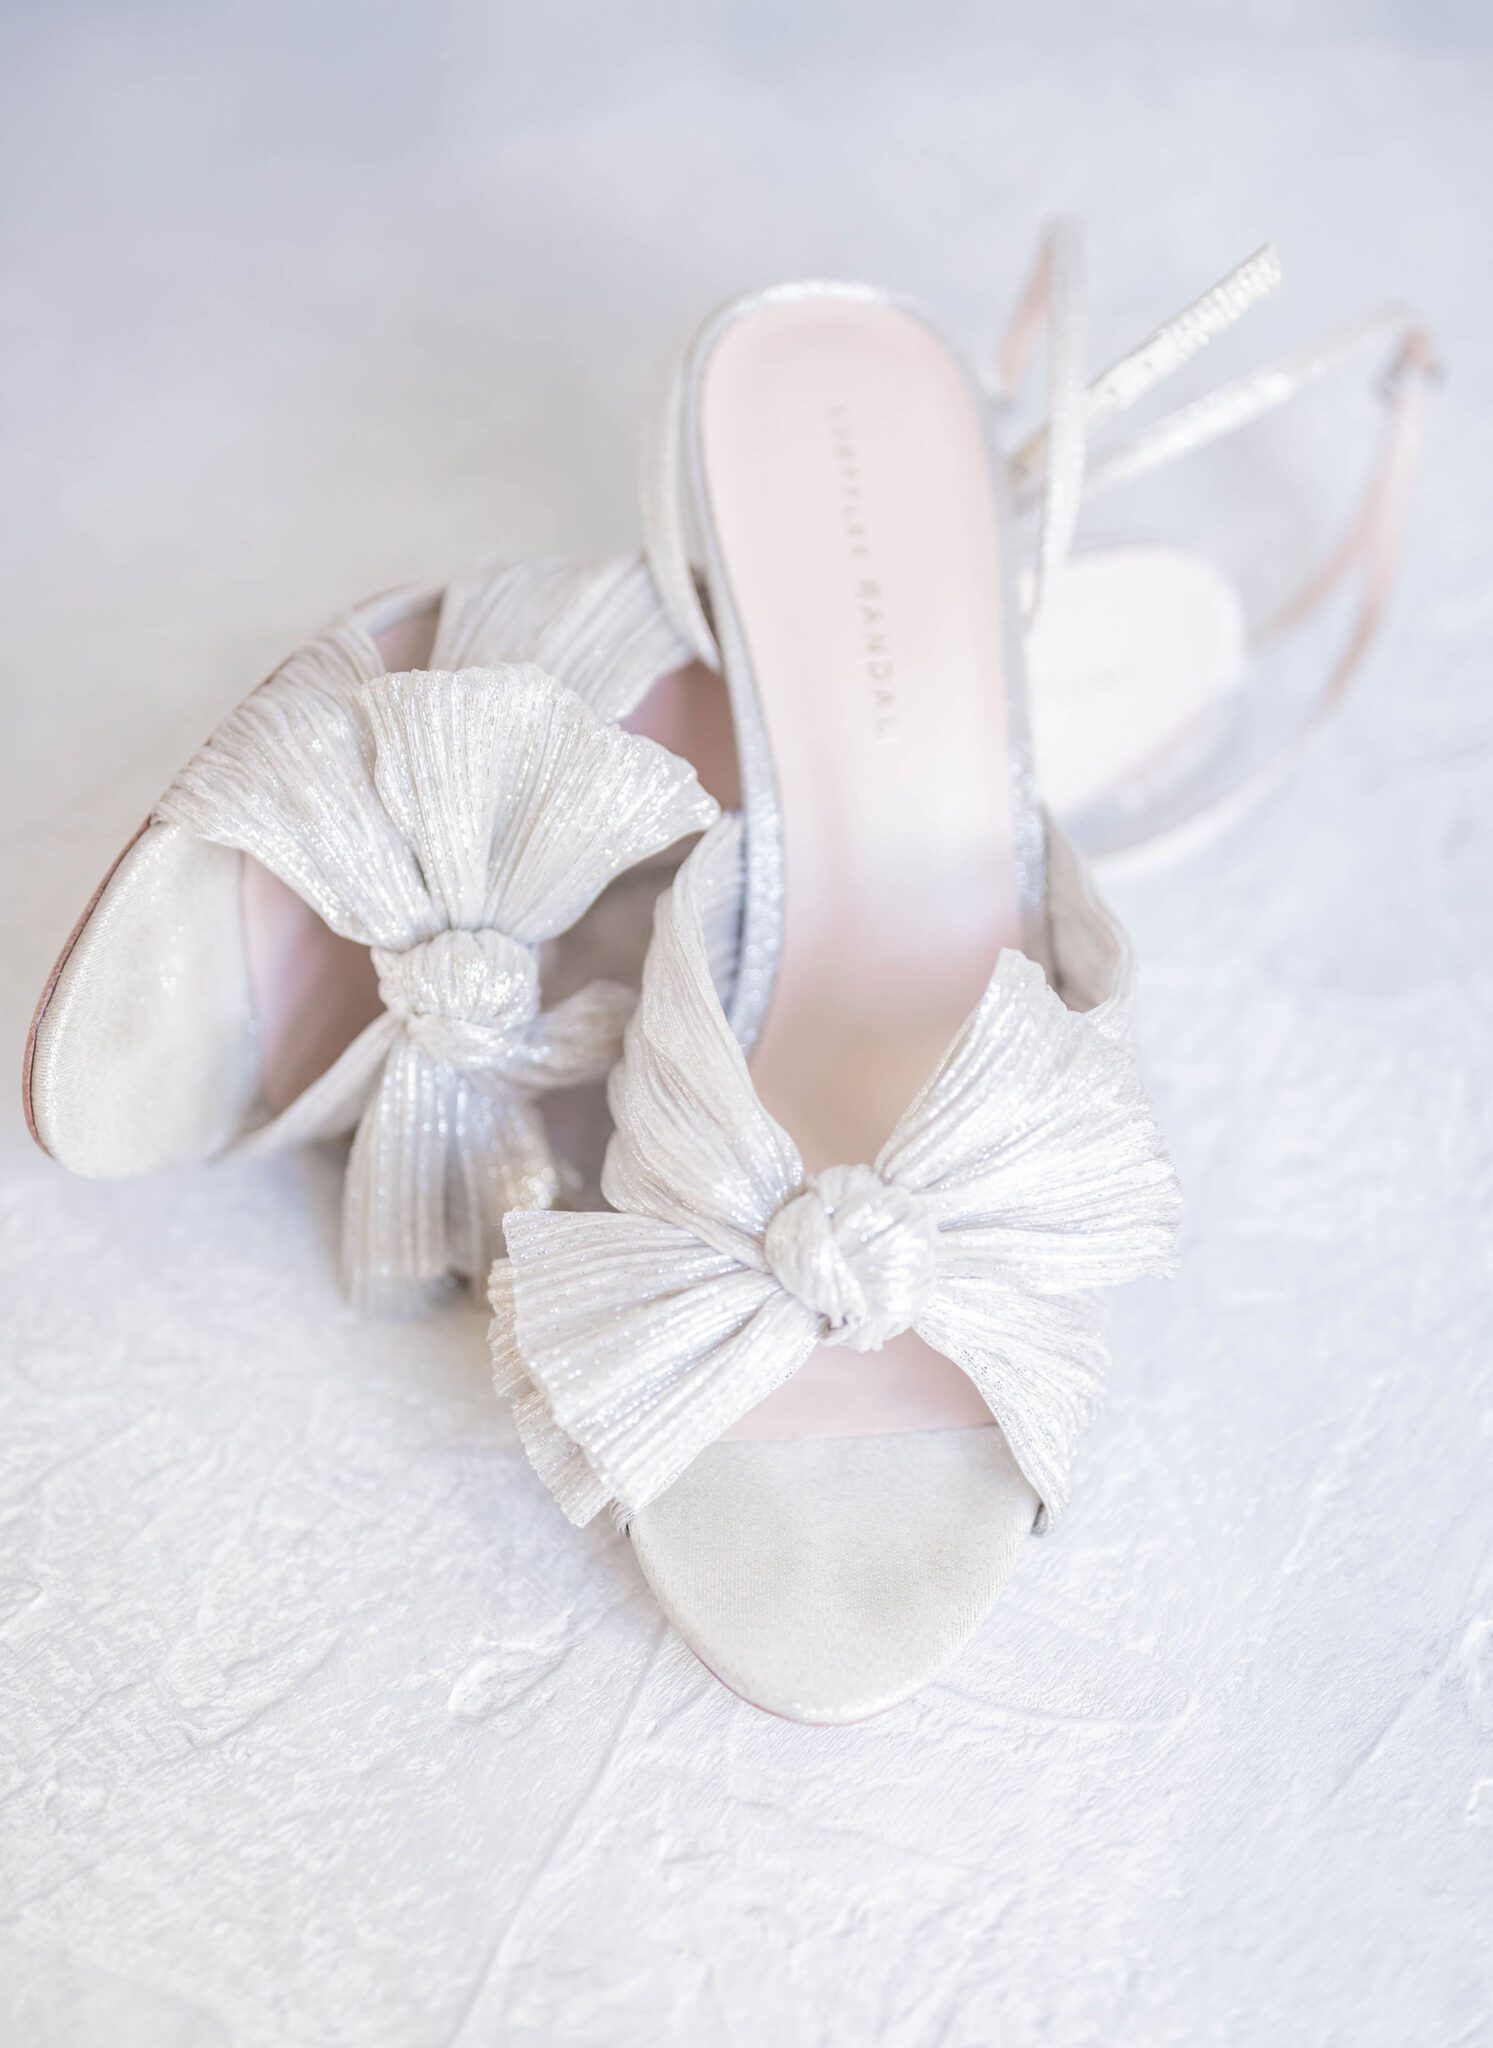 Elegant pearl-coloured bridal shoes with a fabric bow from Loeffler Randal.